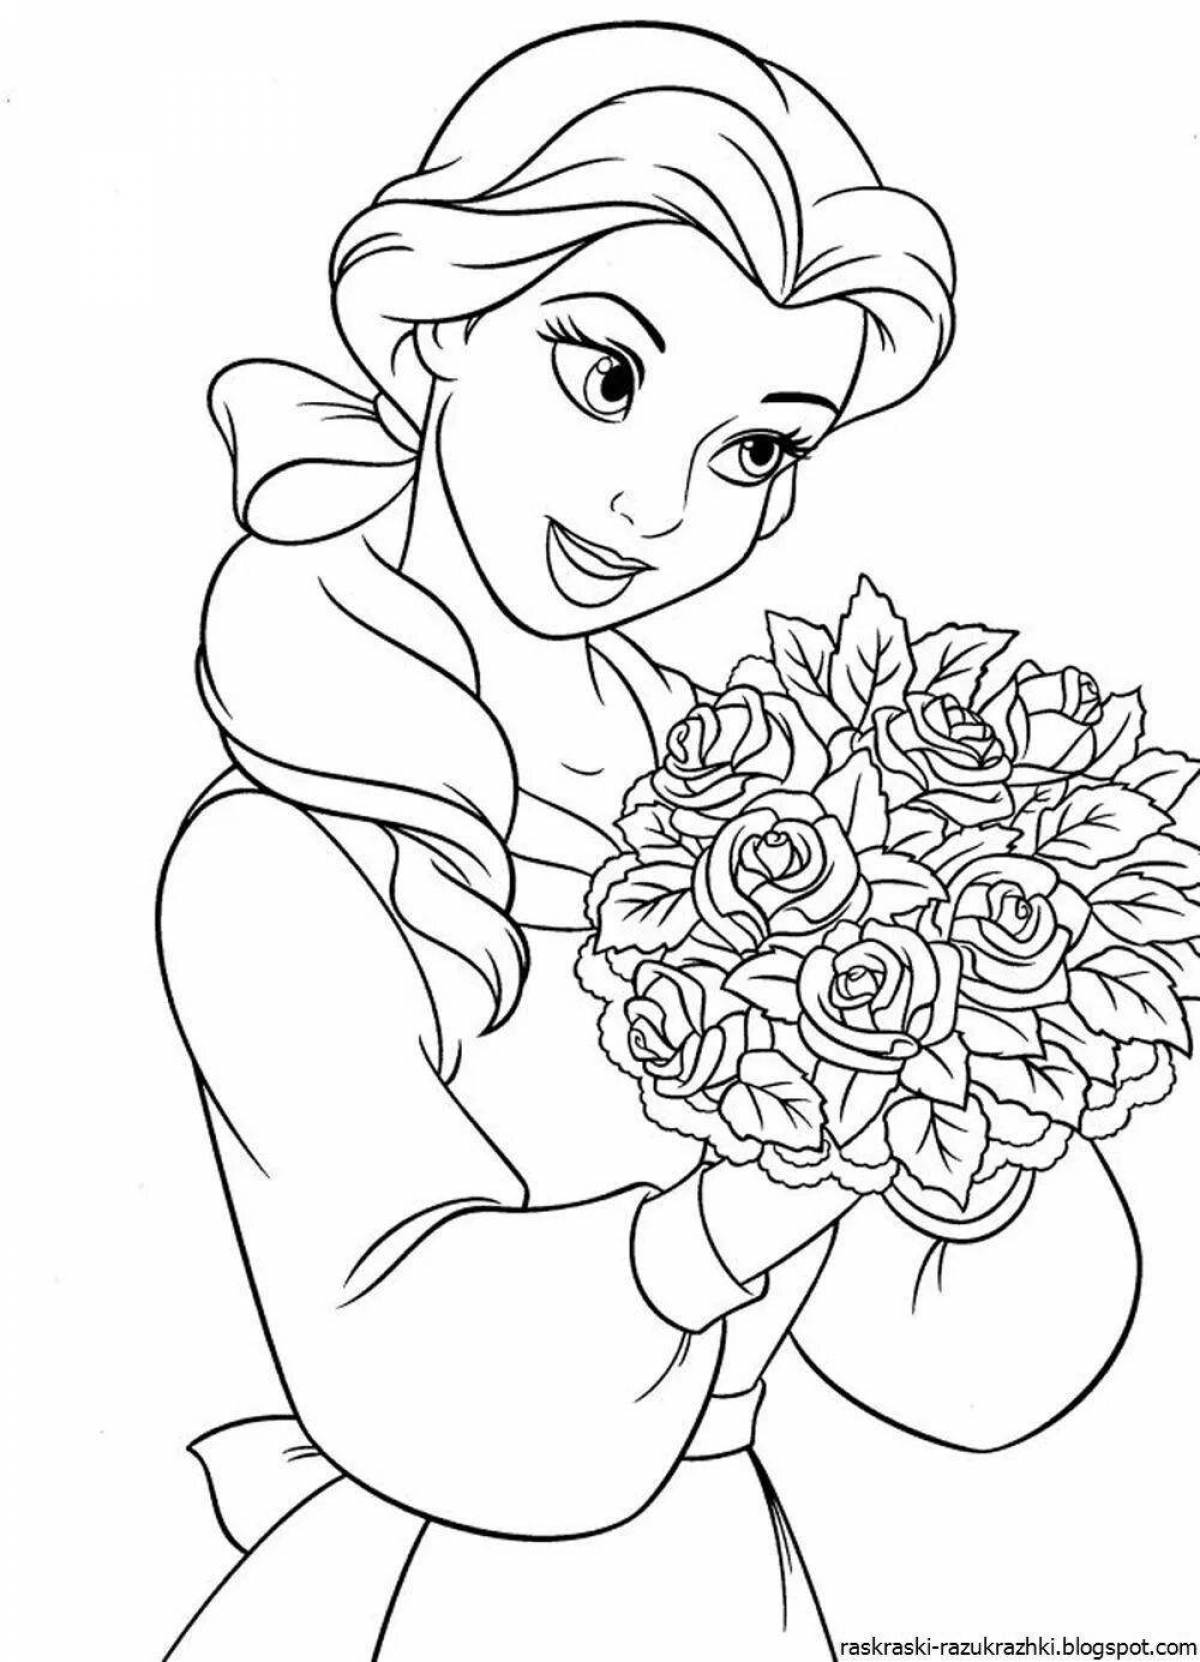 Coloring pages for girls 8-10 years old